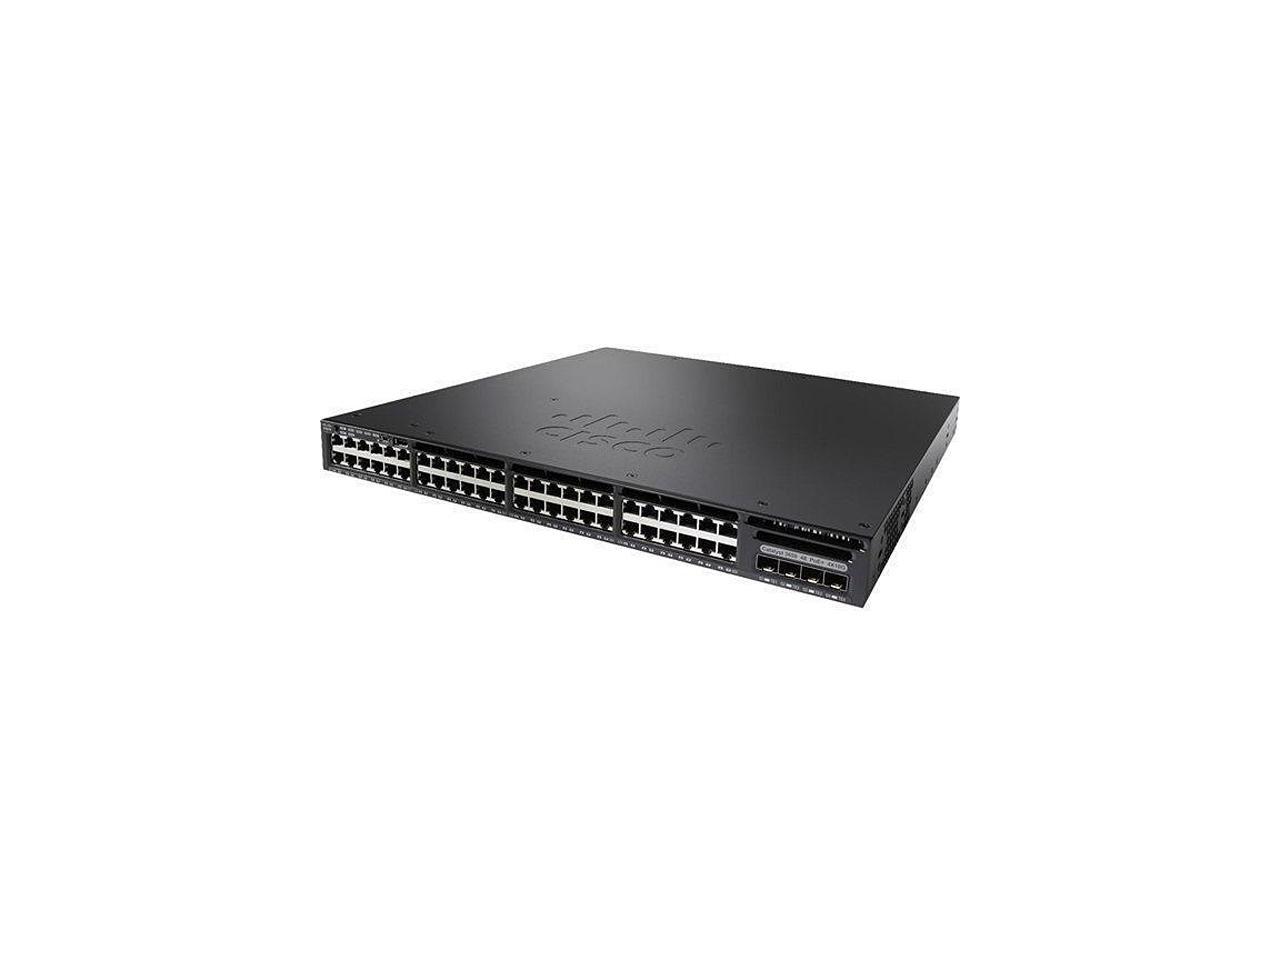 CISCO Catalyst 3650 WS-C3650-48TS-L Managed Ethernet Switch